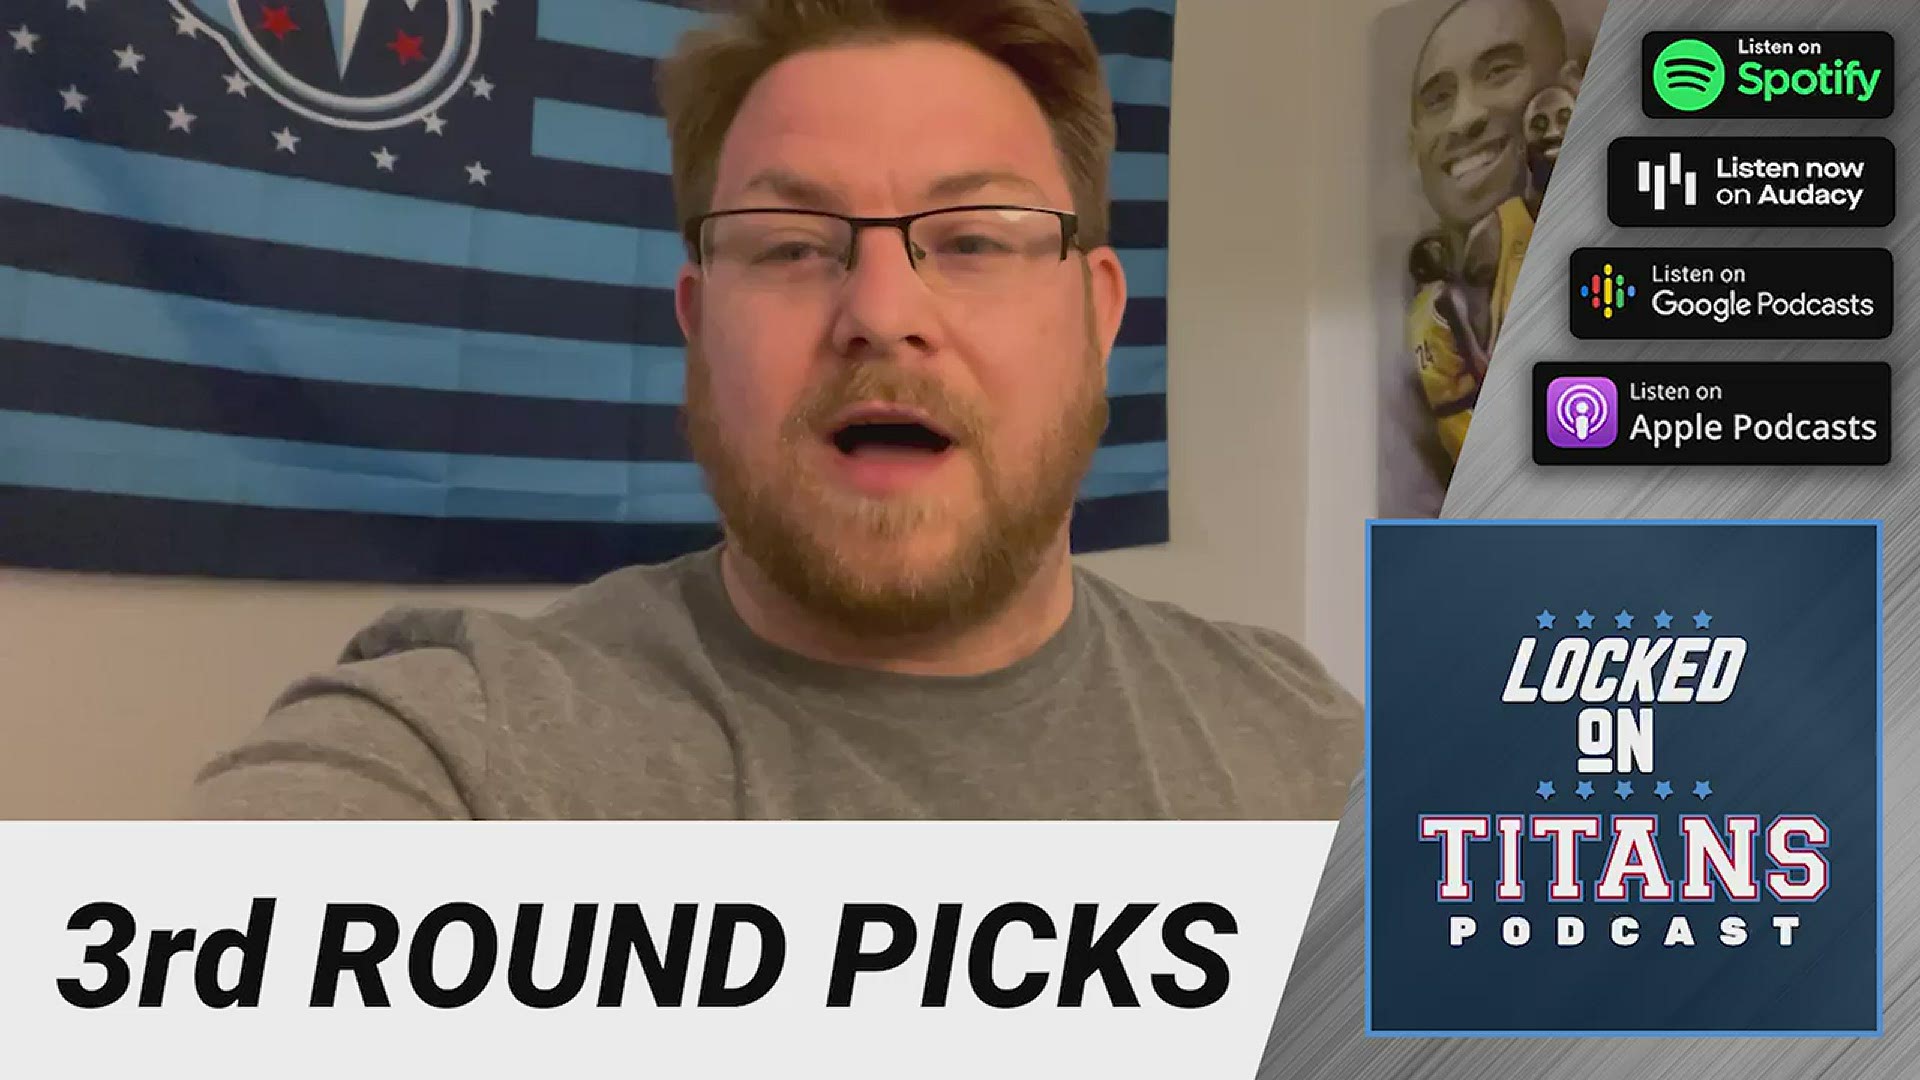 The host of the Locked On Titans podcast reacts to the team's picks in the third round of the NFL Draft.